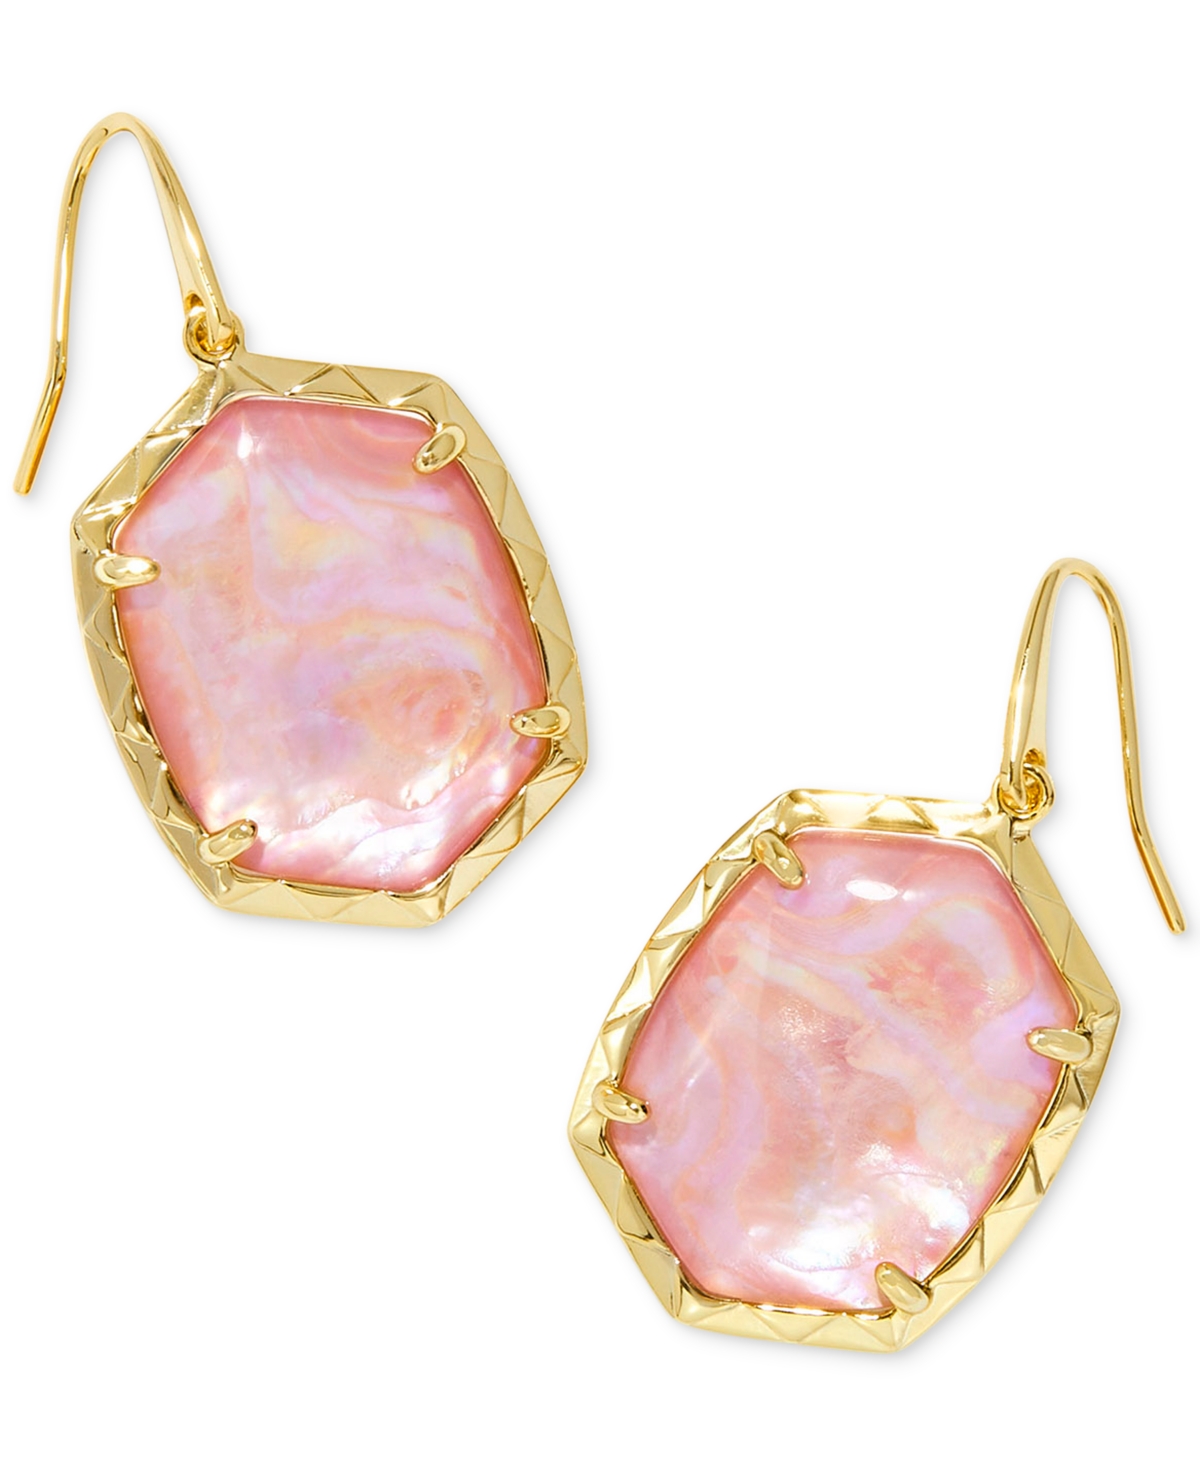 14k Gold-Plated Stone Drop Earrings - Coral Pink Mother Of Pearl